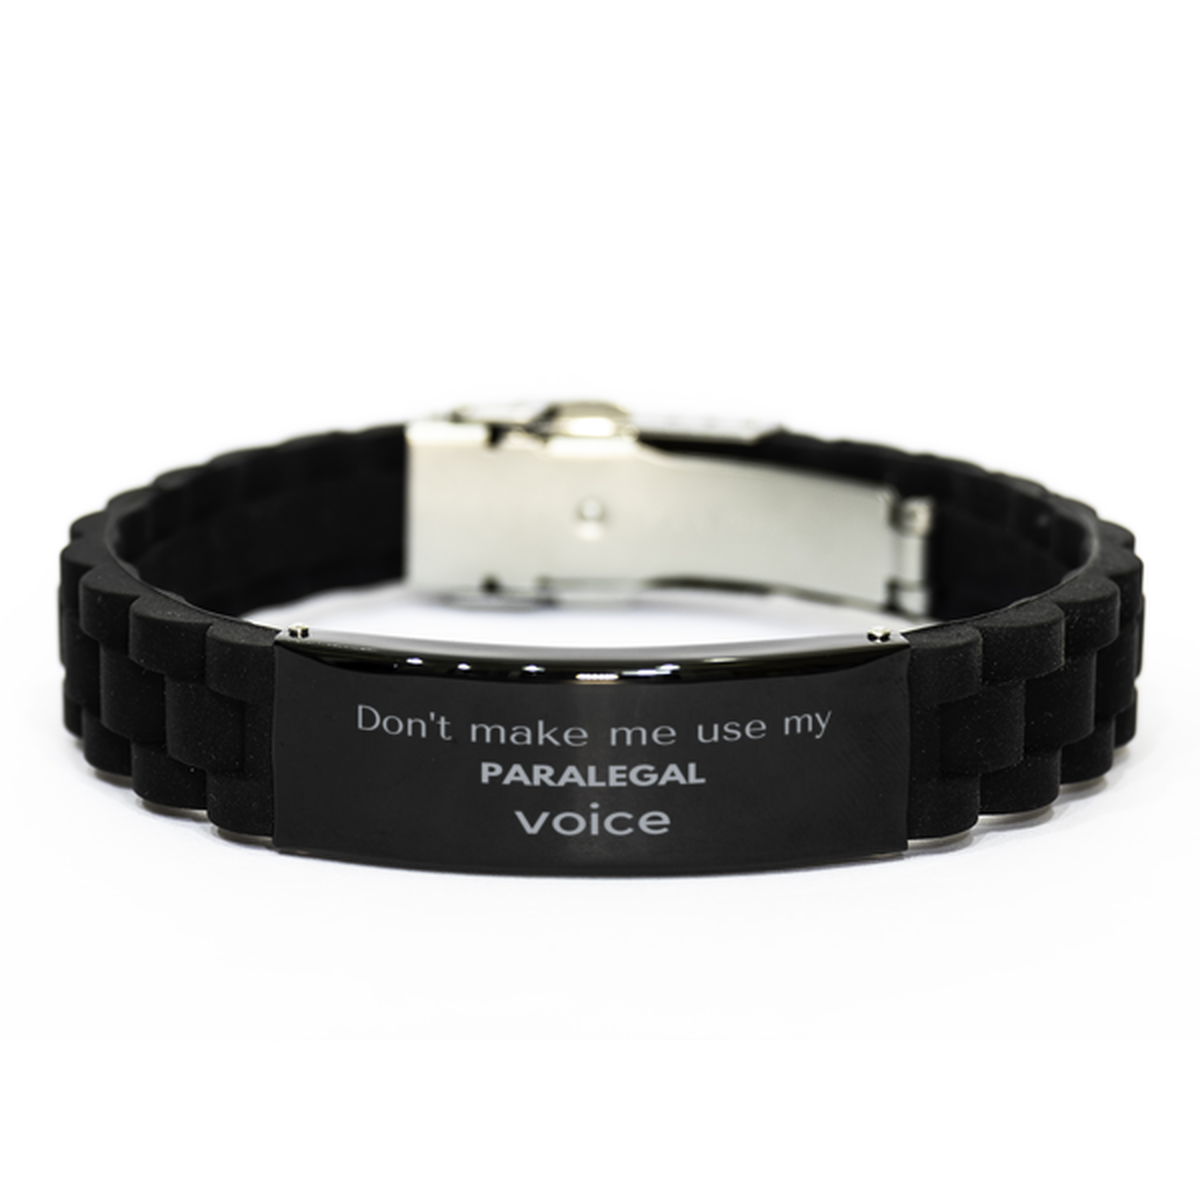 Don't make me use my Paralegal voice, Sarcasm Paralegal Gifts, Christmas Paralegal Black Glidelock Clasp Bracelet Birthday Unique Gifts For Paralegal Coworkers, Men, Women, Colleague, Friends